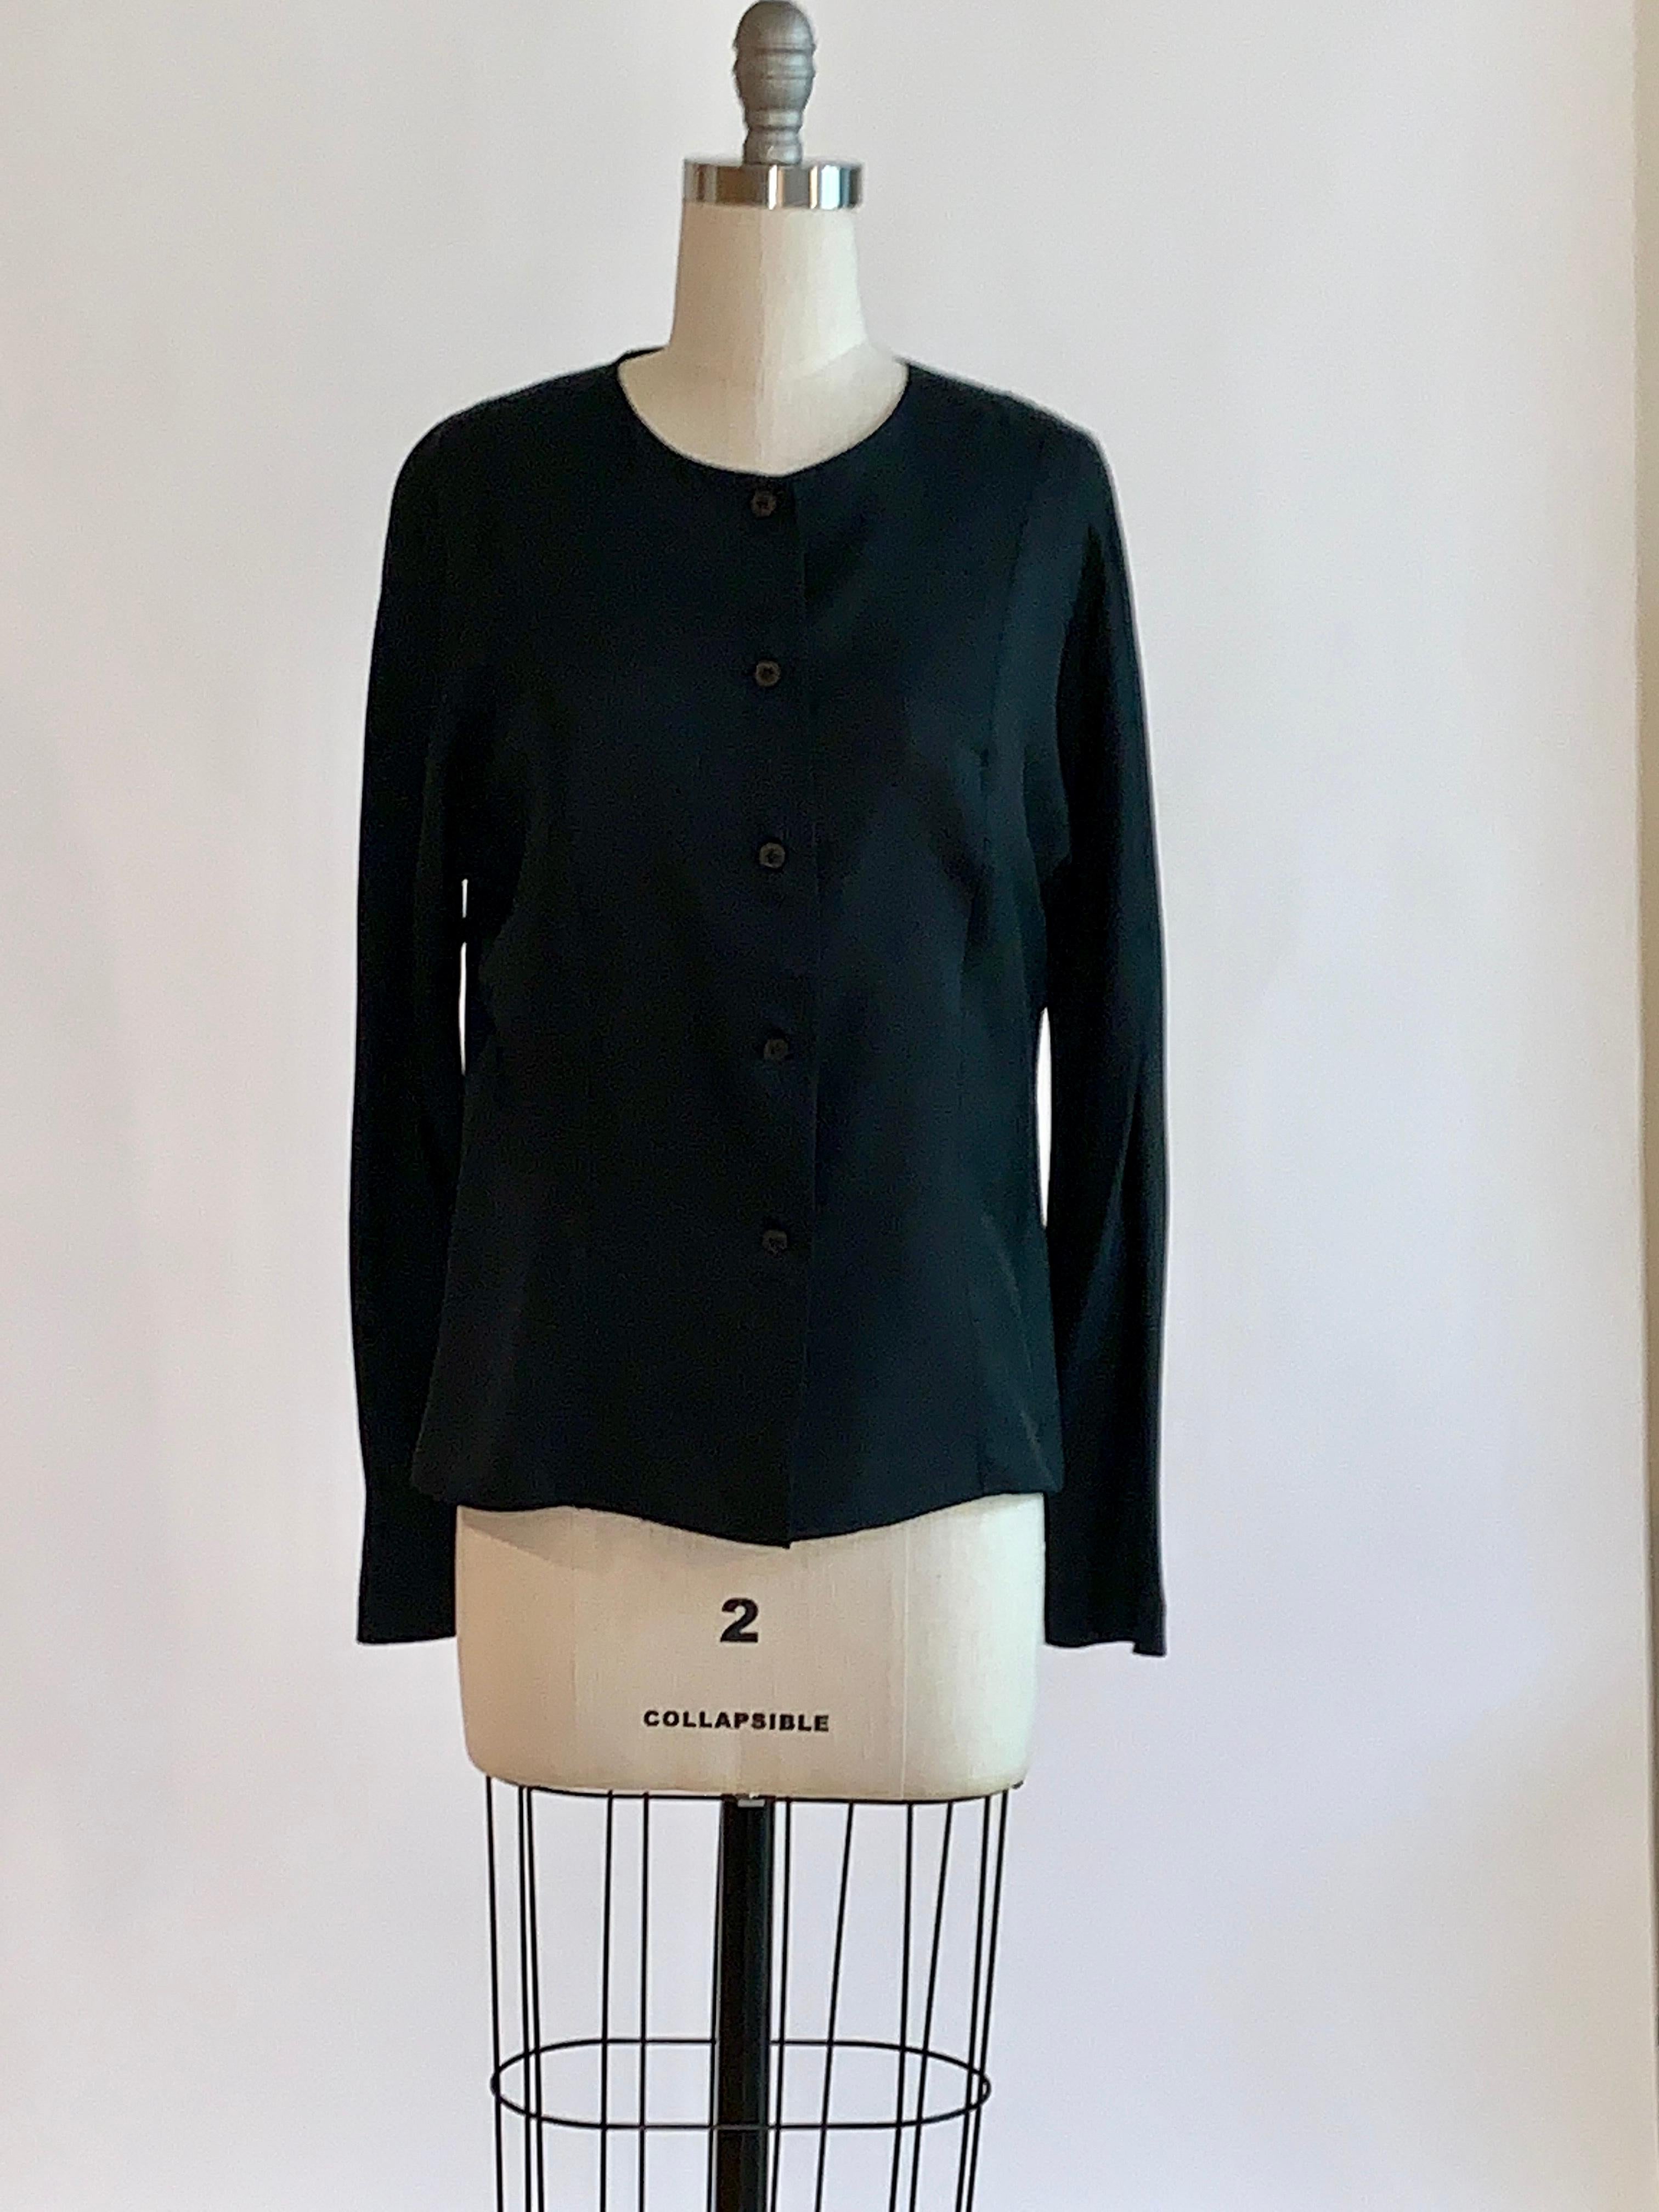 Sprouse by Stephen Sprouse black silk long sleeve blouse with round neck, button front, and long sleeves. Princess seam detail at front and back creates a tailored shape. 

100% silk. 

Made in Korea.

Labelled size 6, best fits S/M. See